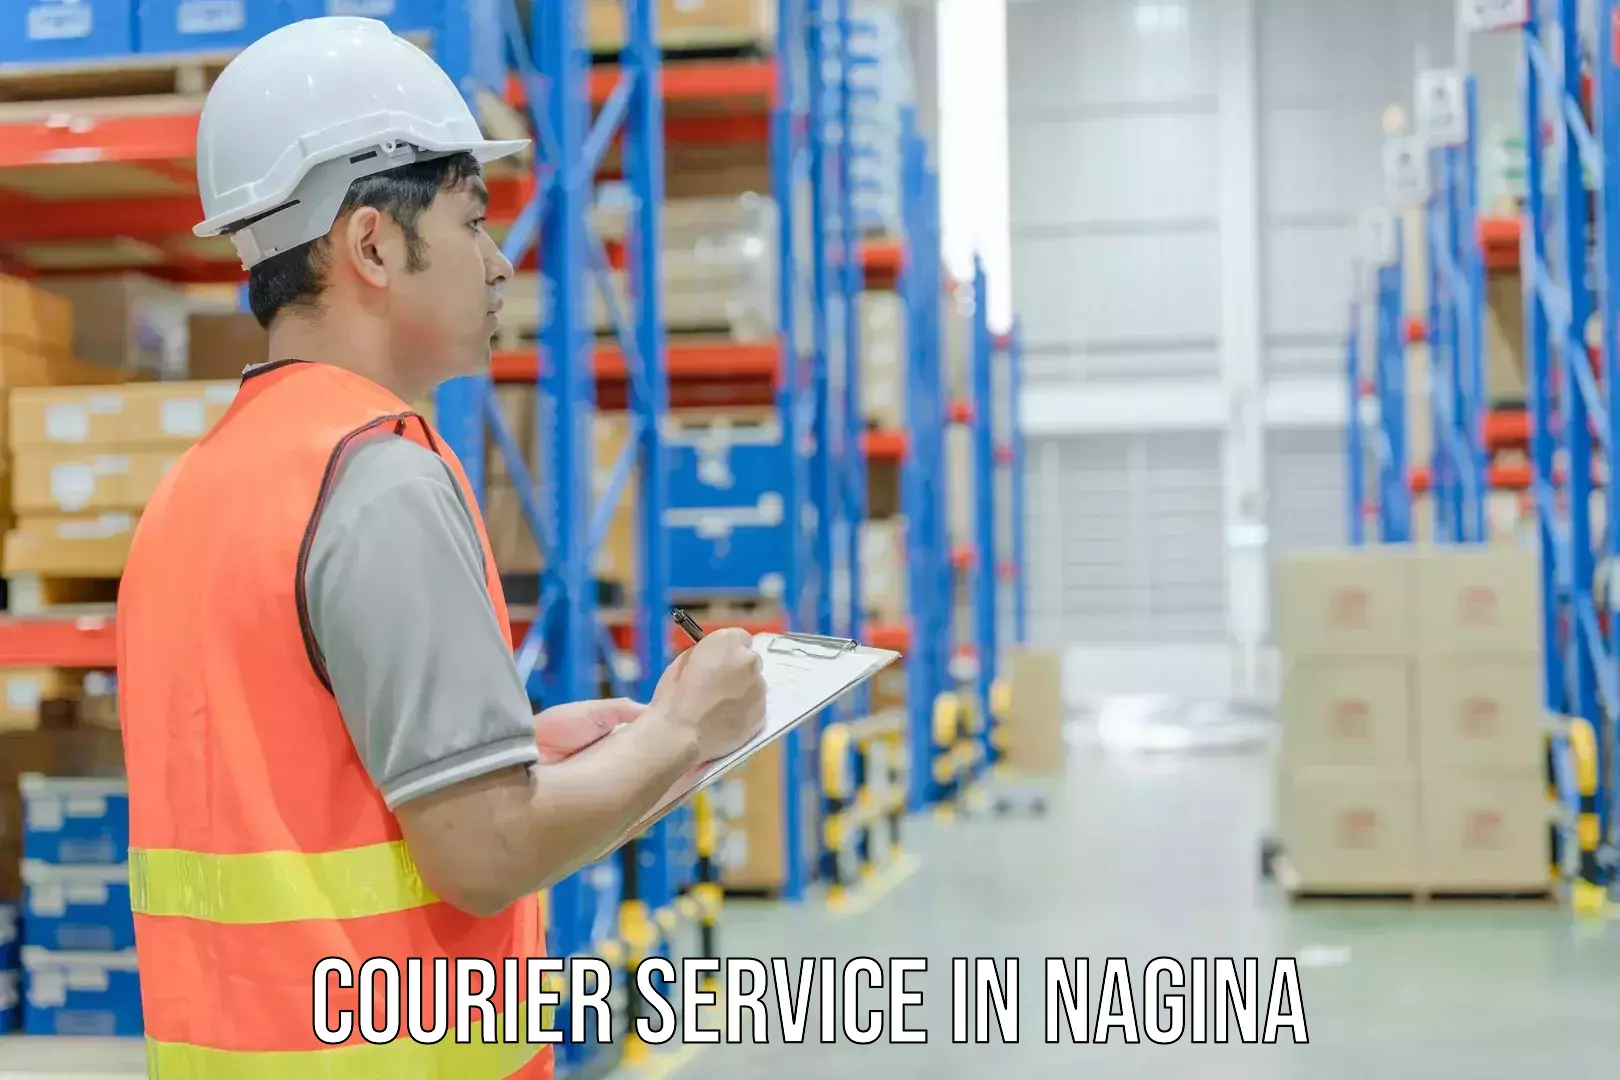 Enhanced delivery experience in Nagina